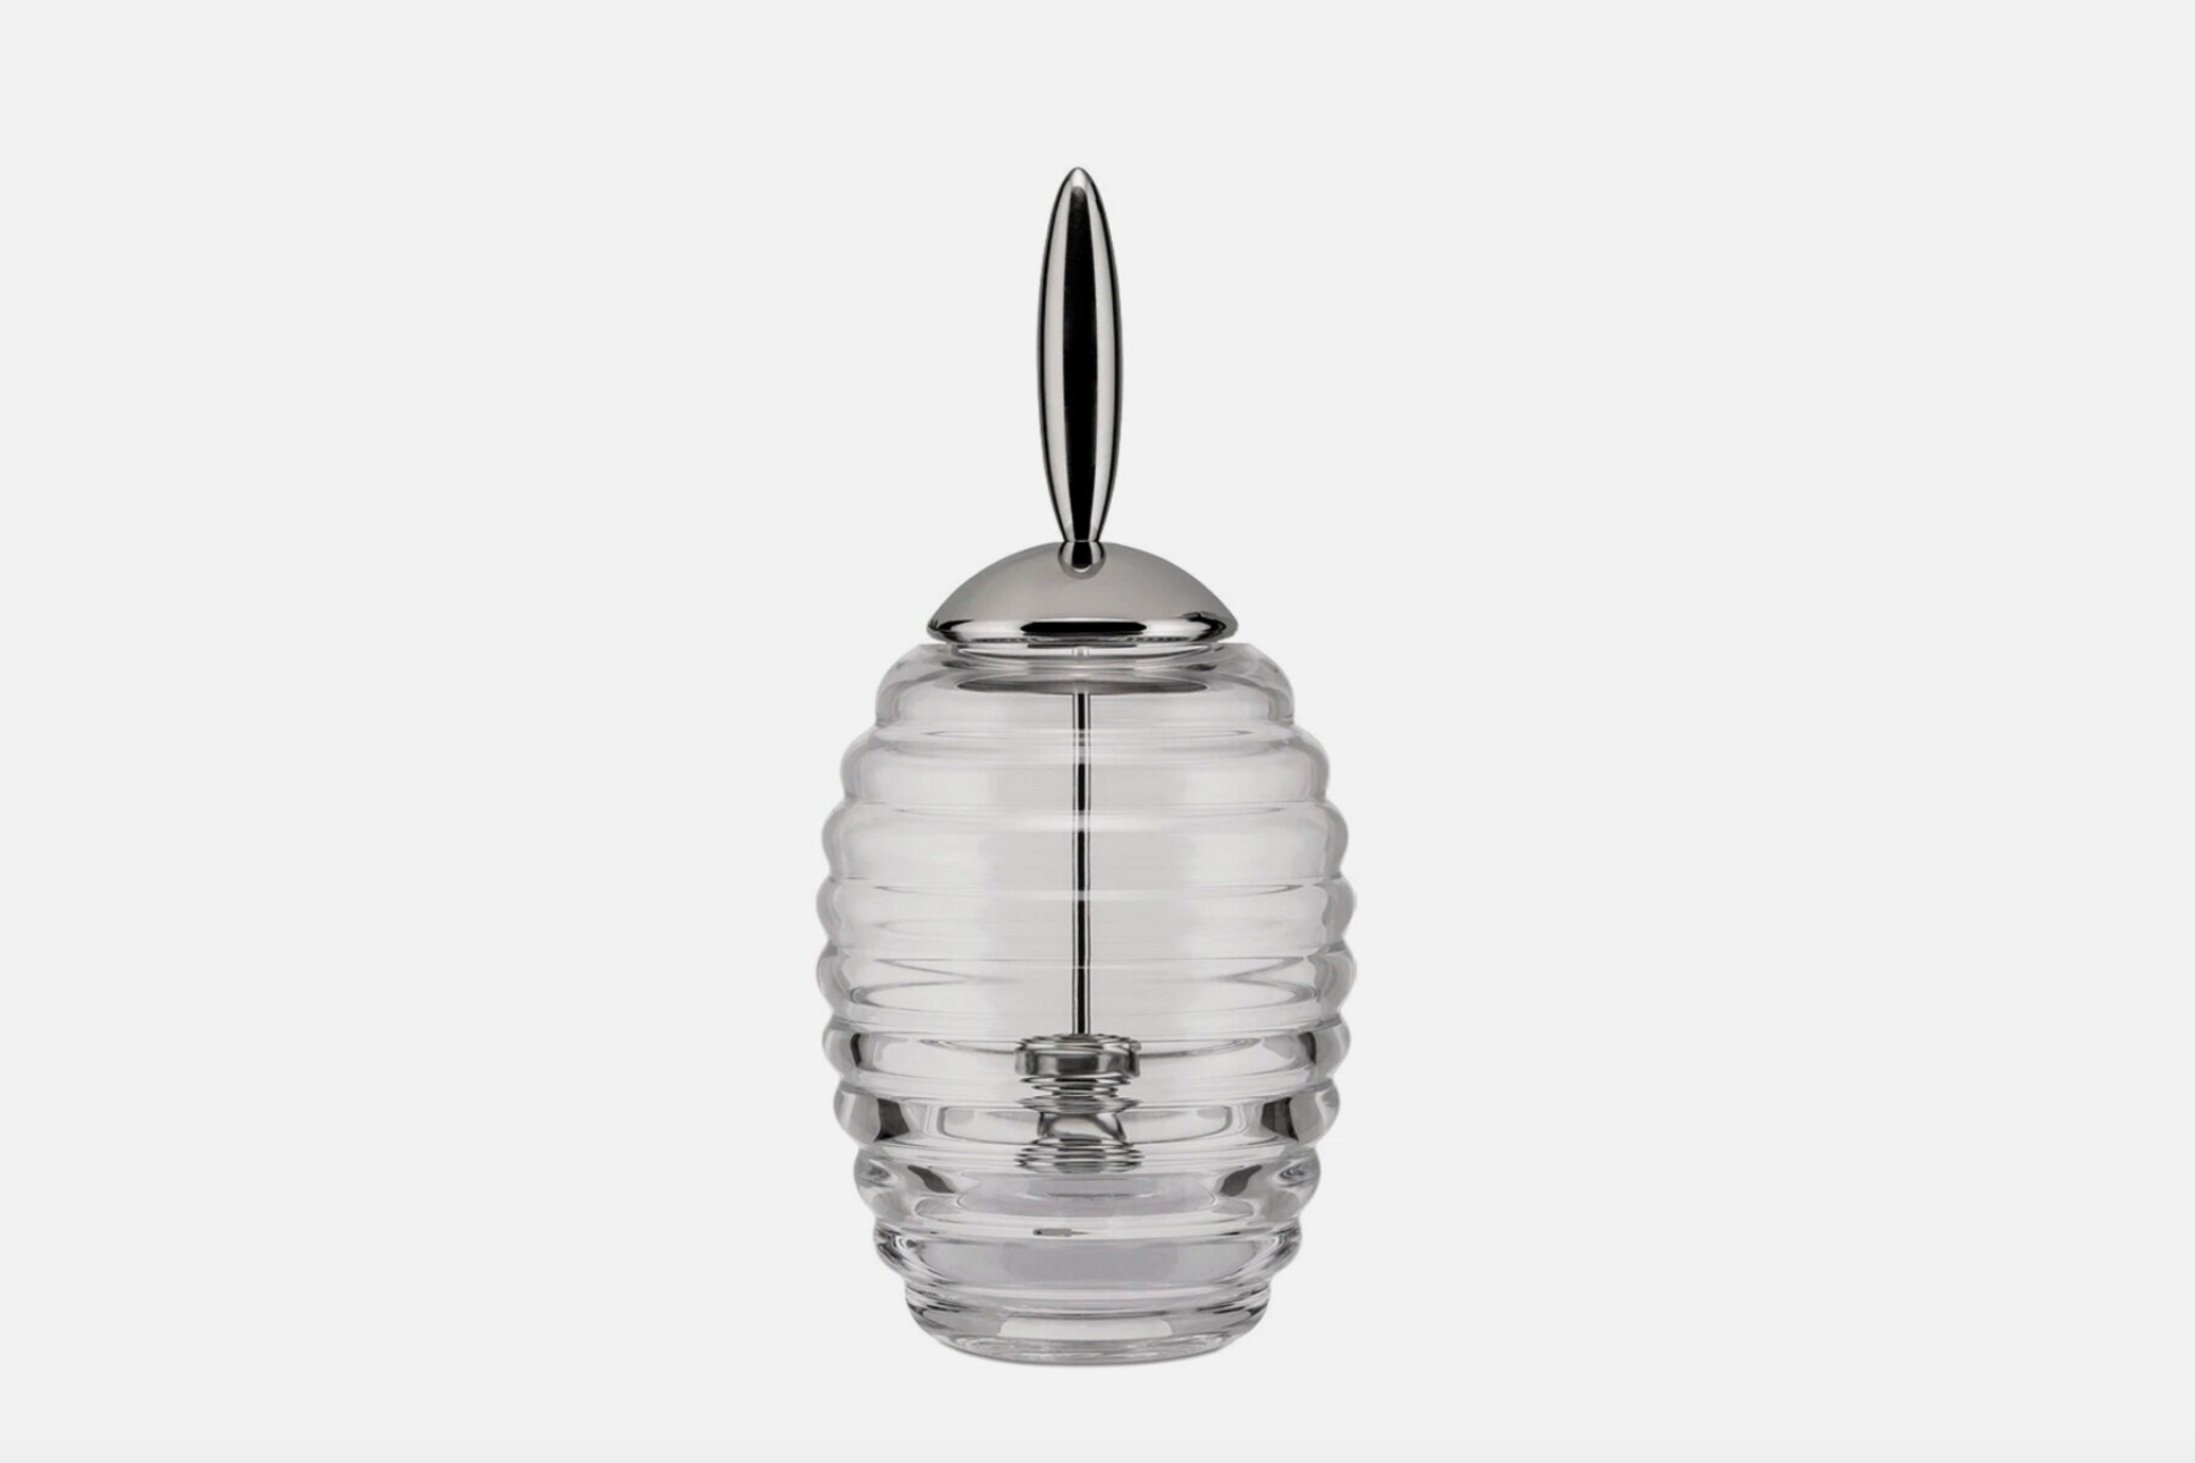 Alessi Honey and Sugar Jar launched in 1995.